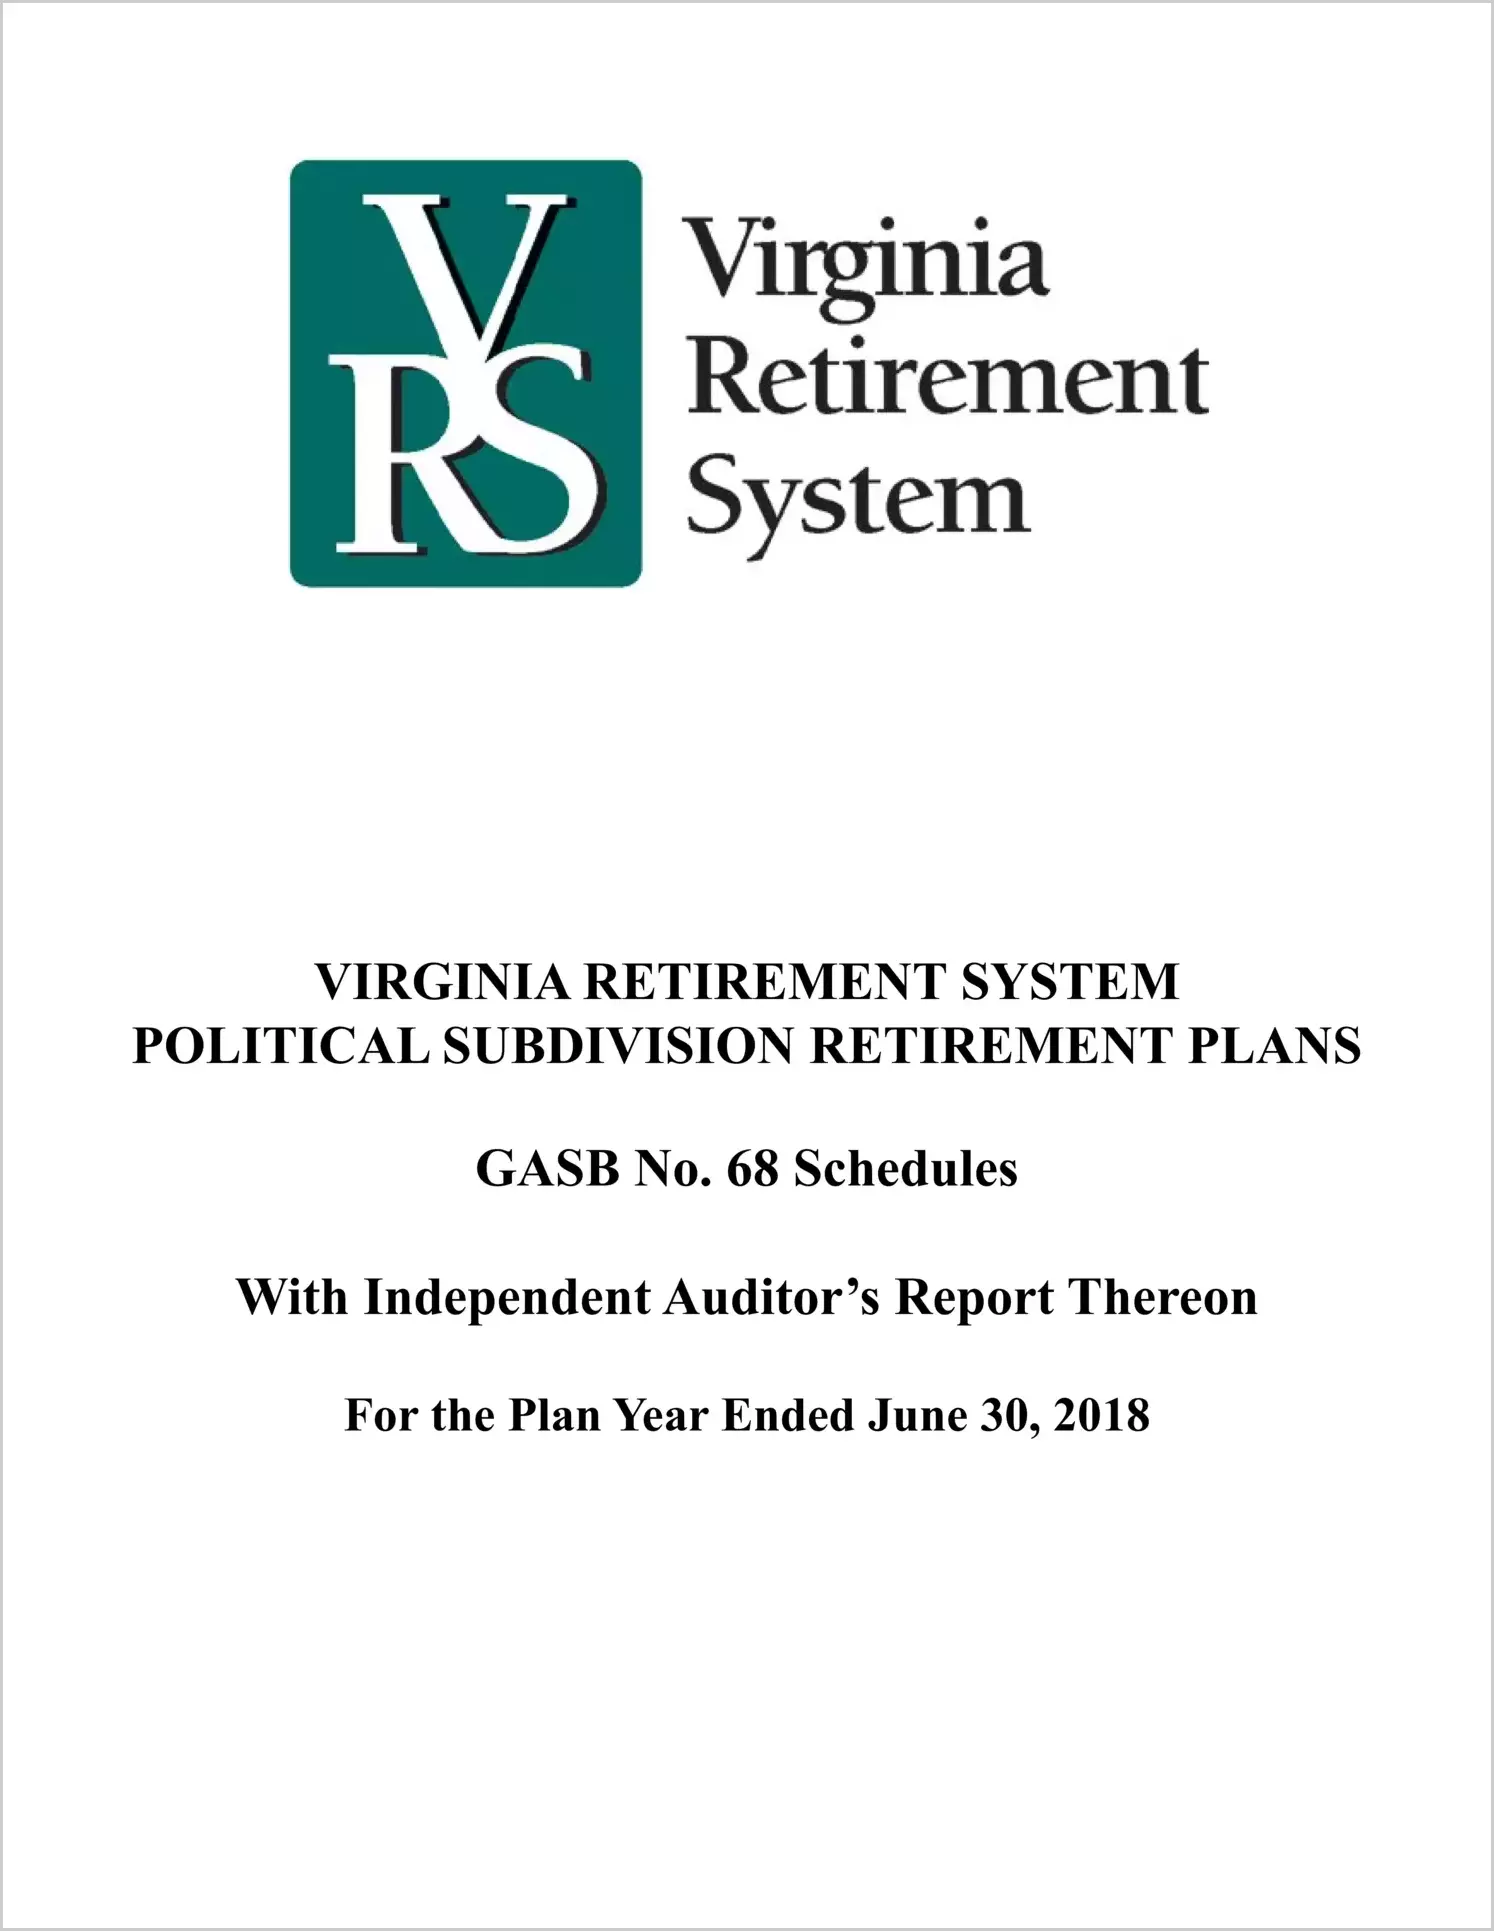 GASB 68 Schedule - Virginia Retirement System Political Subdivision Retirement Plans for the plan year ended June 30, 2018